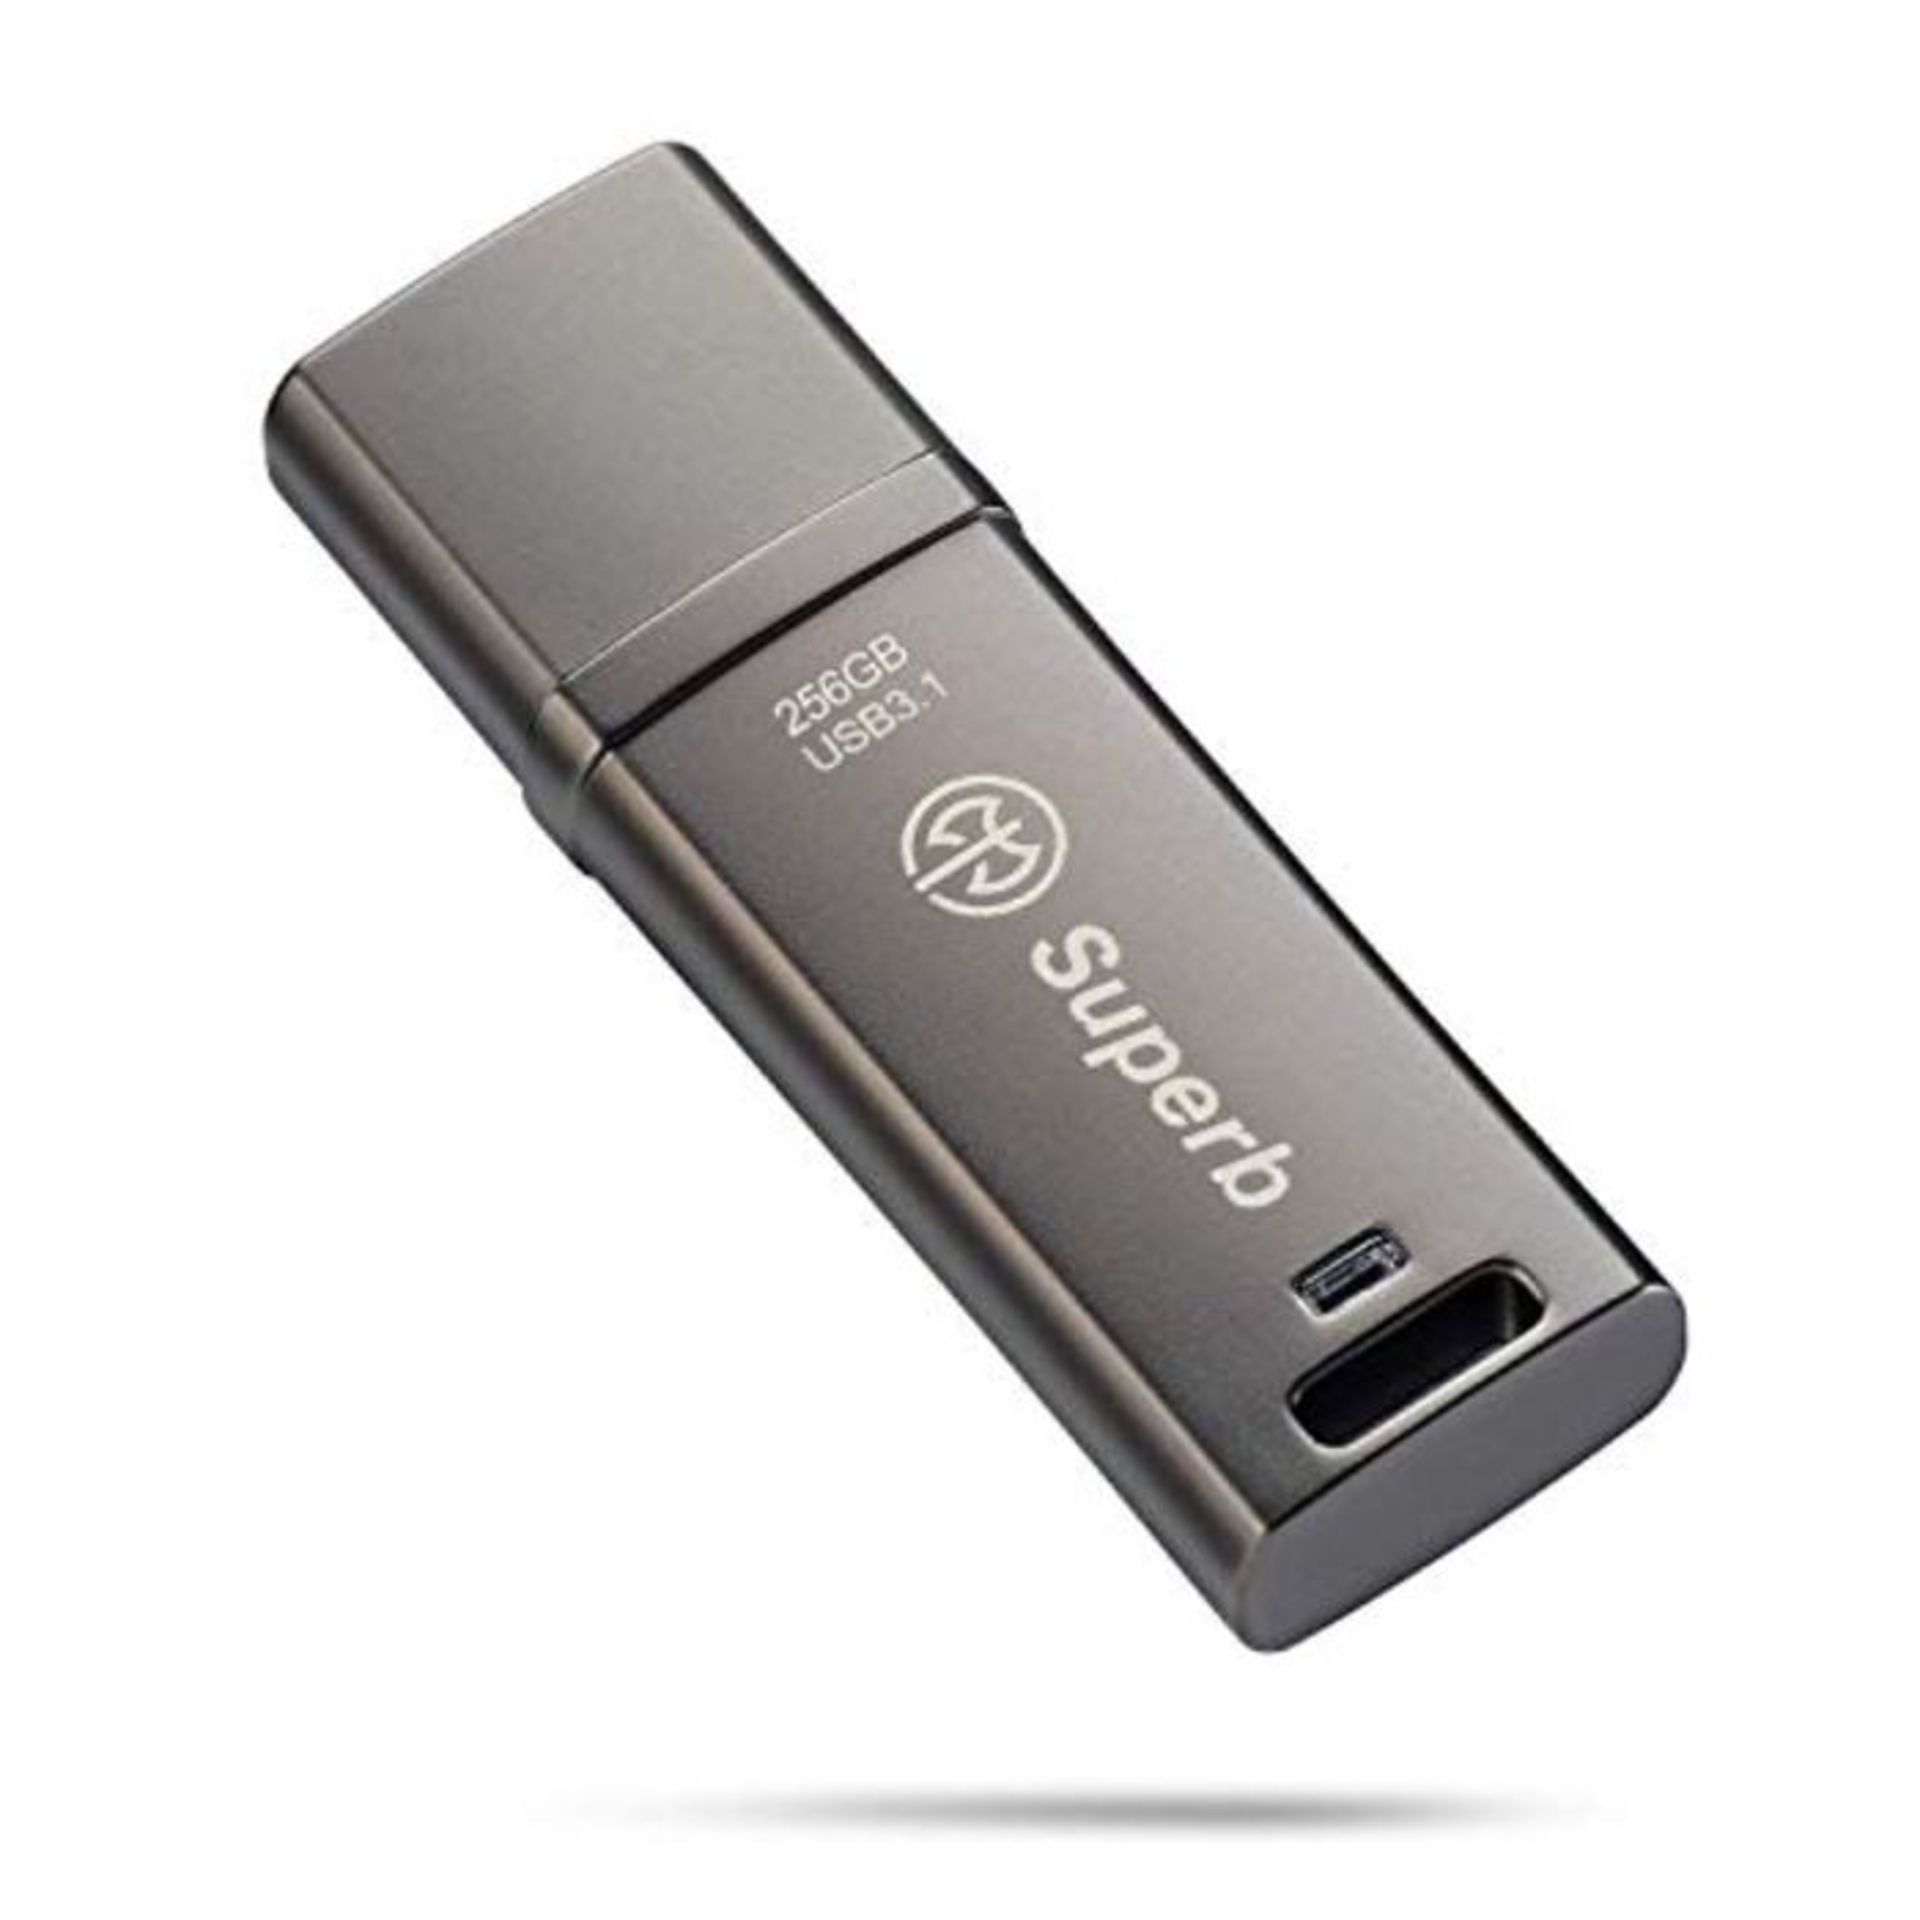 RRP £50.00 AXE Superb 256GB USB 3.1 SuperSpeed Flash Drive, Metal Casing, Optimal Read Speeds Up